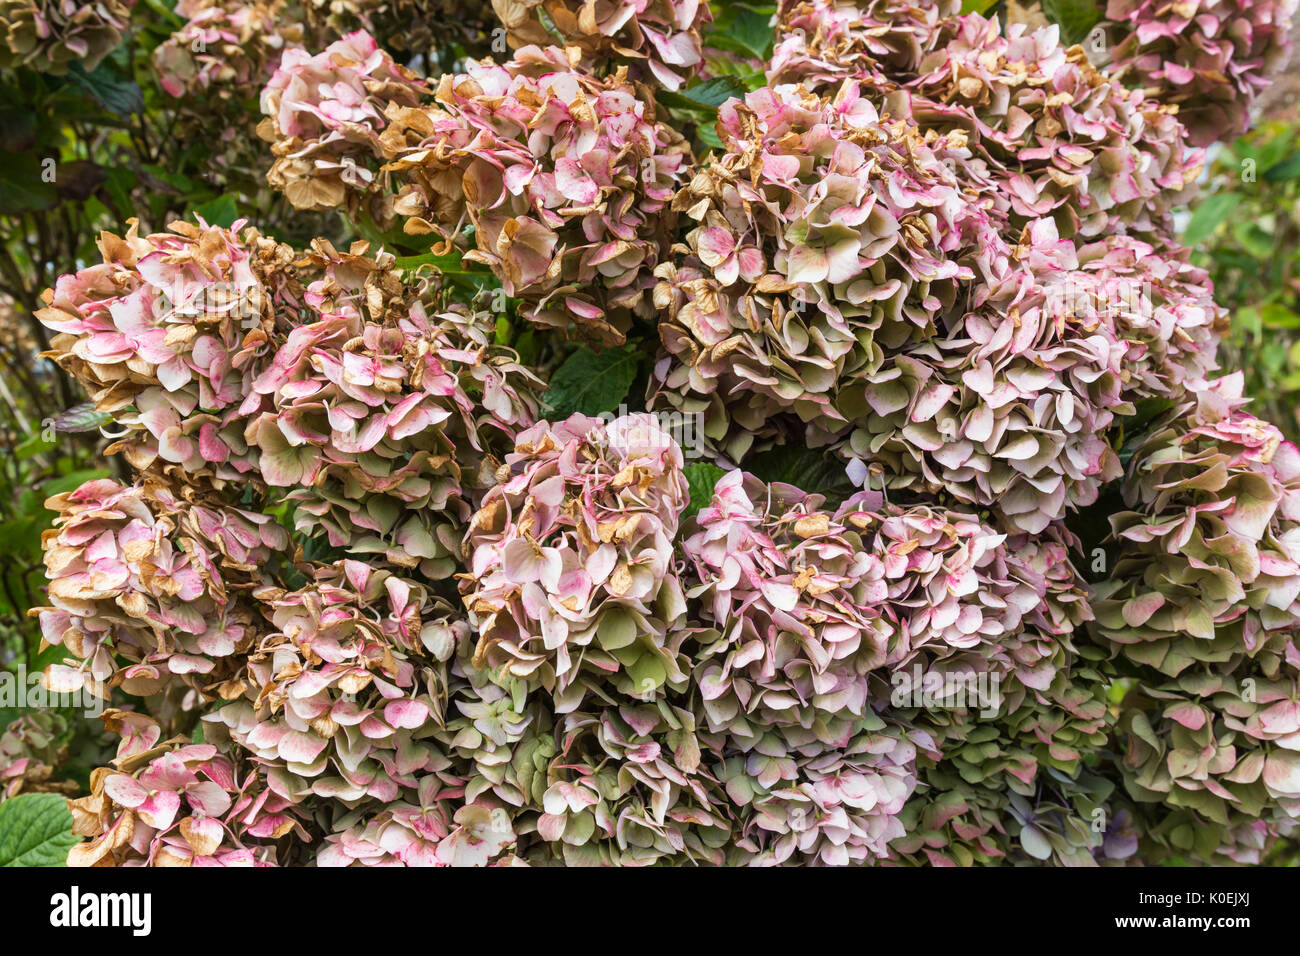 Hydrangea Leaves turn Brown or Black due to Frost Damage